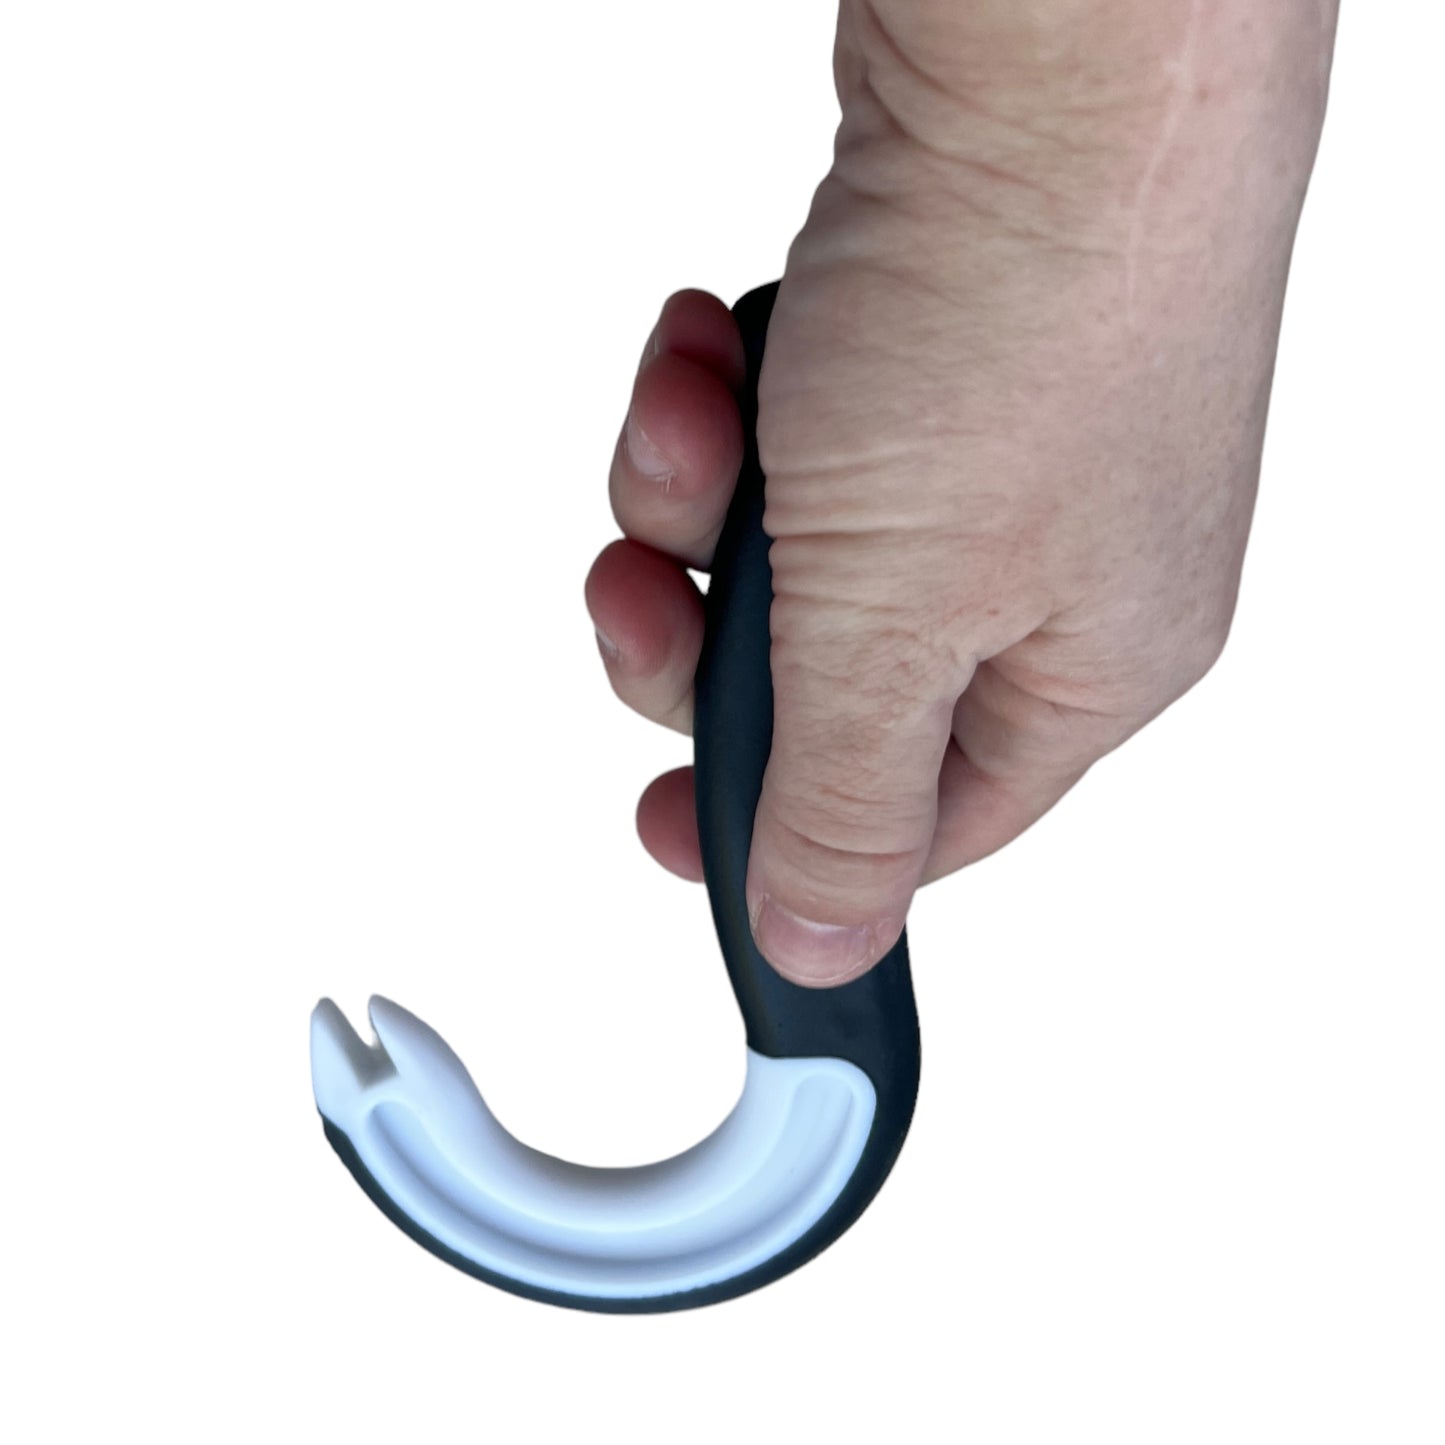 Easy Open Ring Pull Can Tab Opener